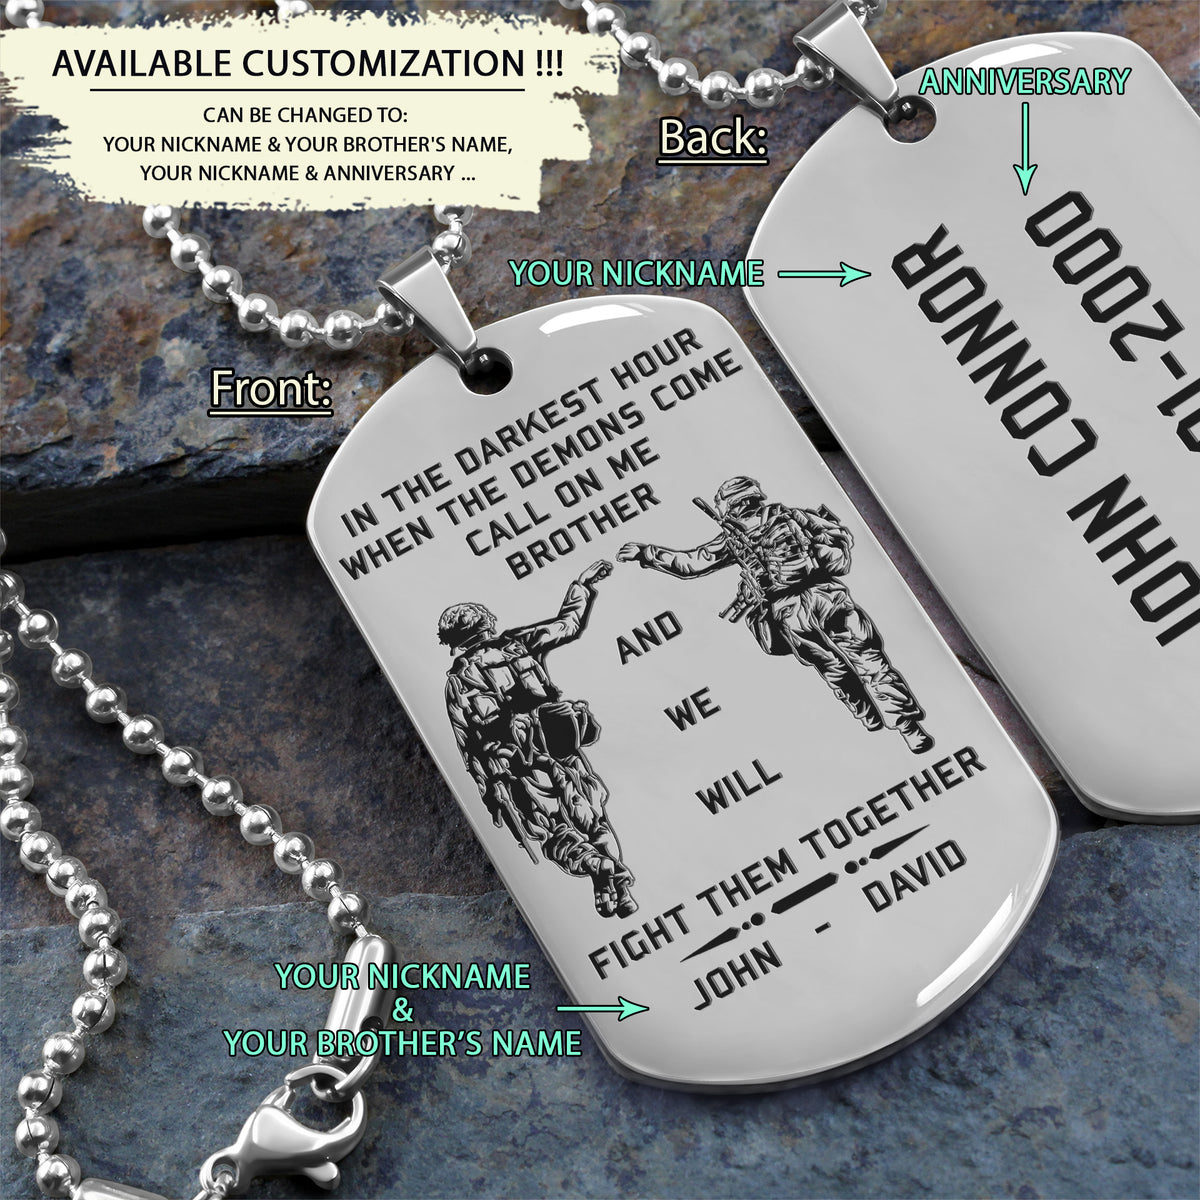 SDD013 - Call On Me Brother - English - Soldier Dog Tag - Engrave Silver Dog Tag